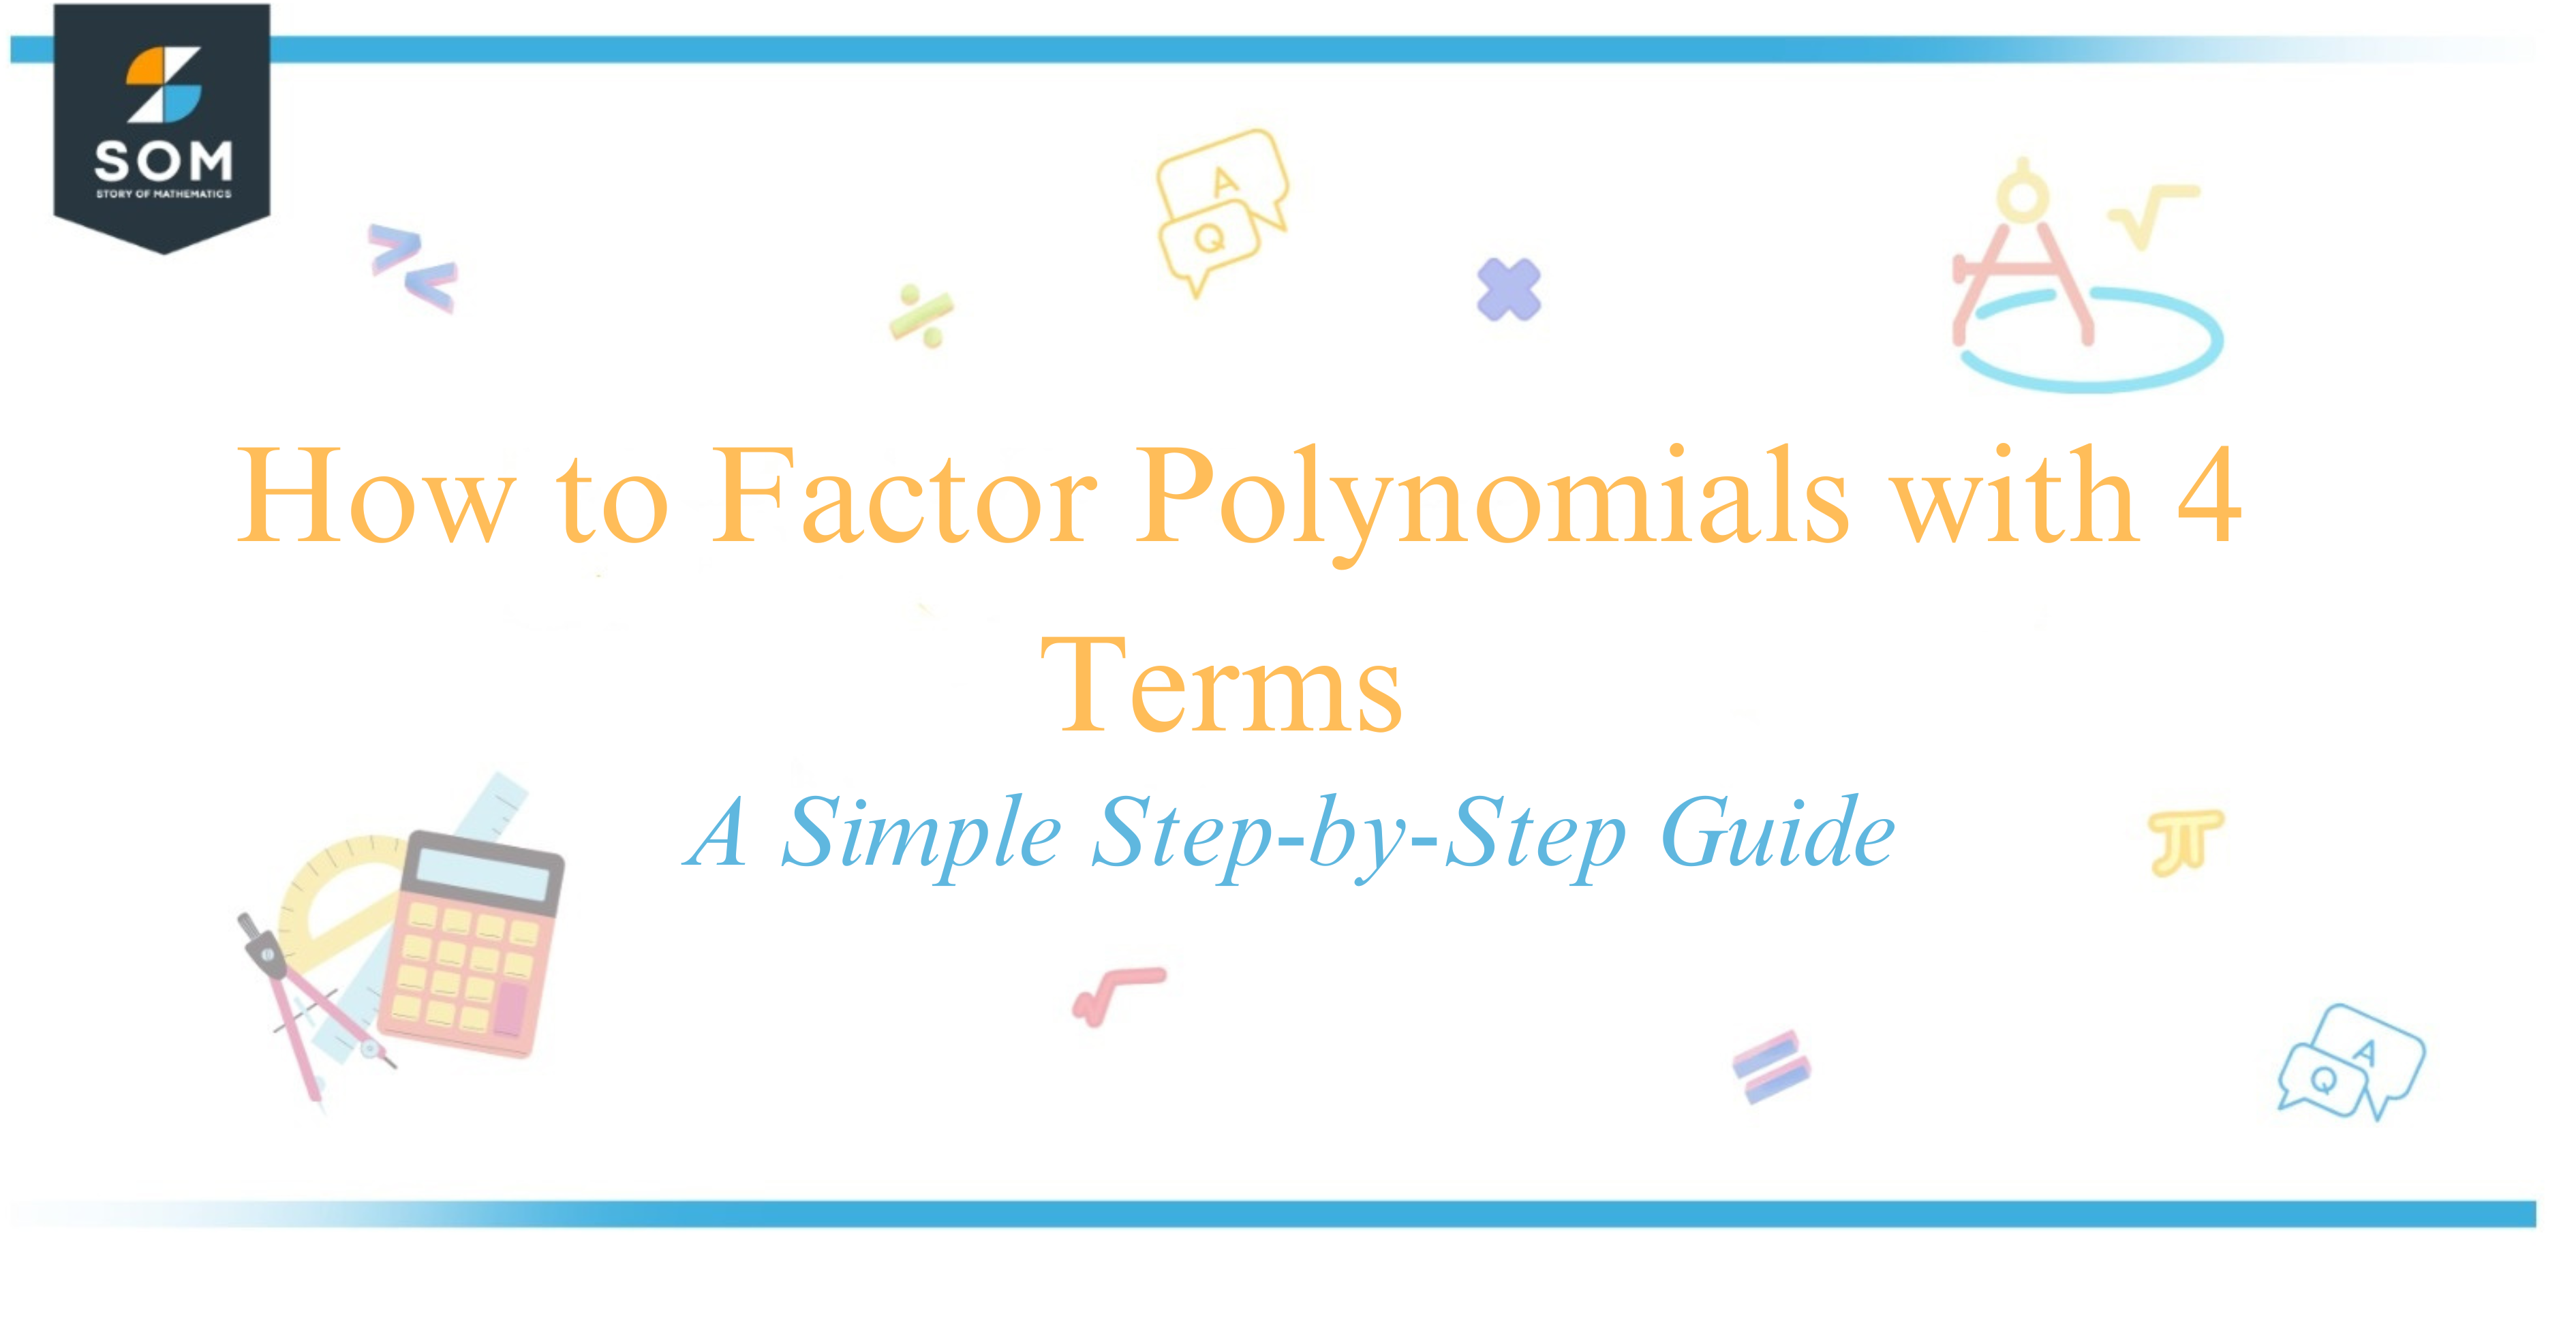 How to Factor Polynomials with 4 Terms A Simple Step-by-Step Guide